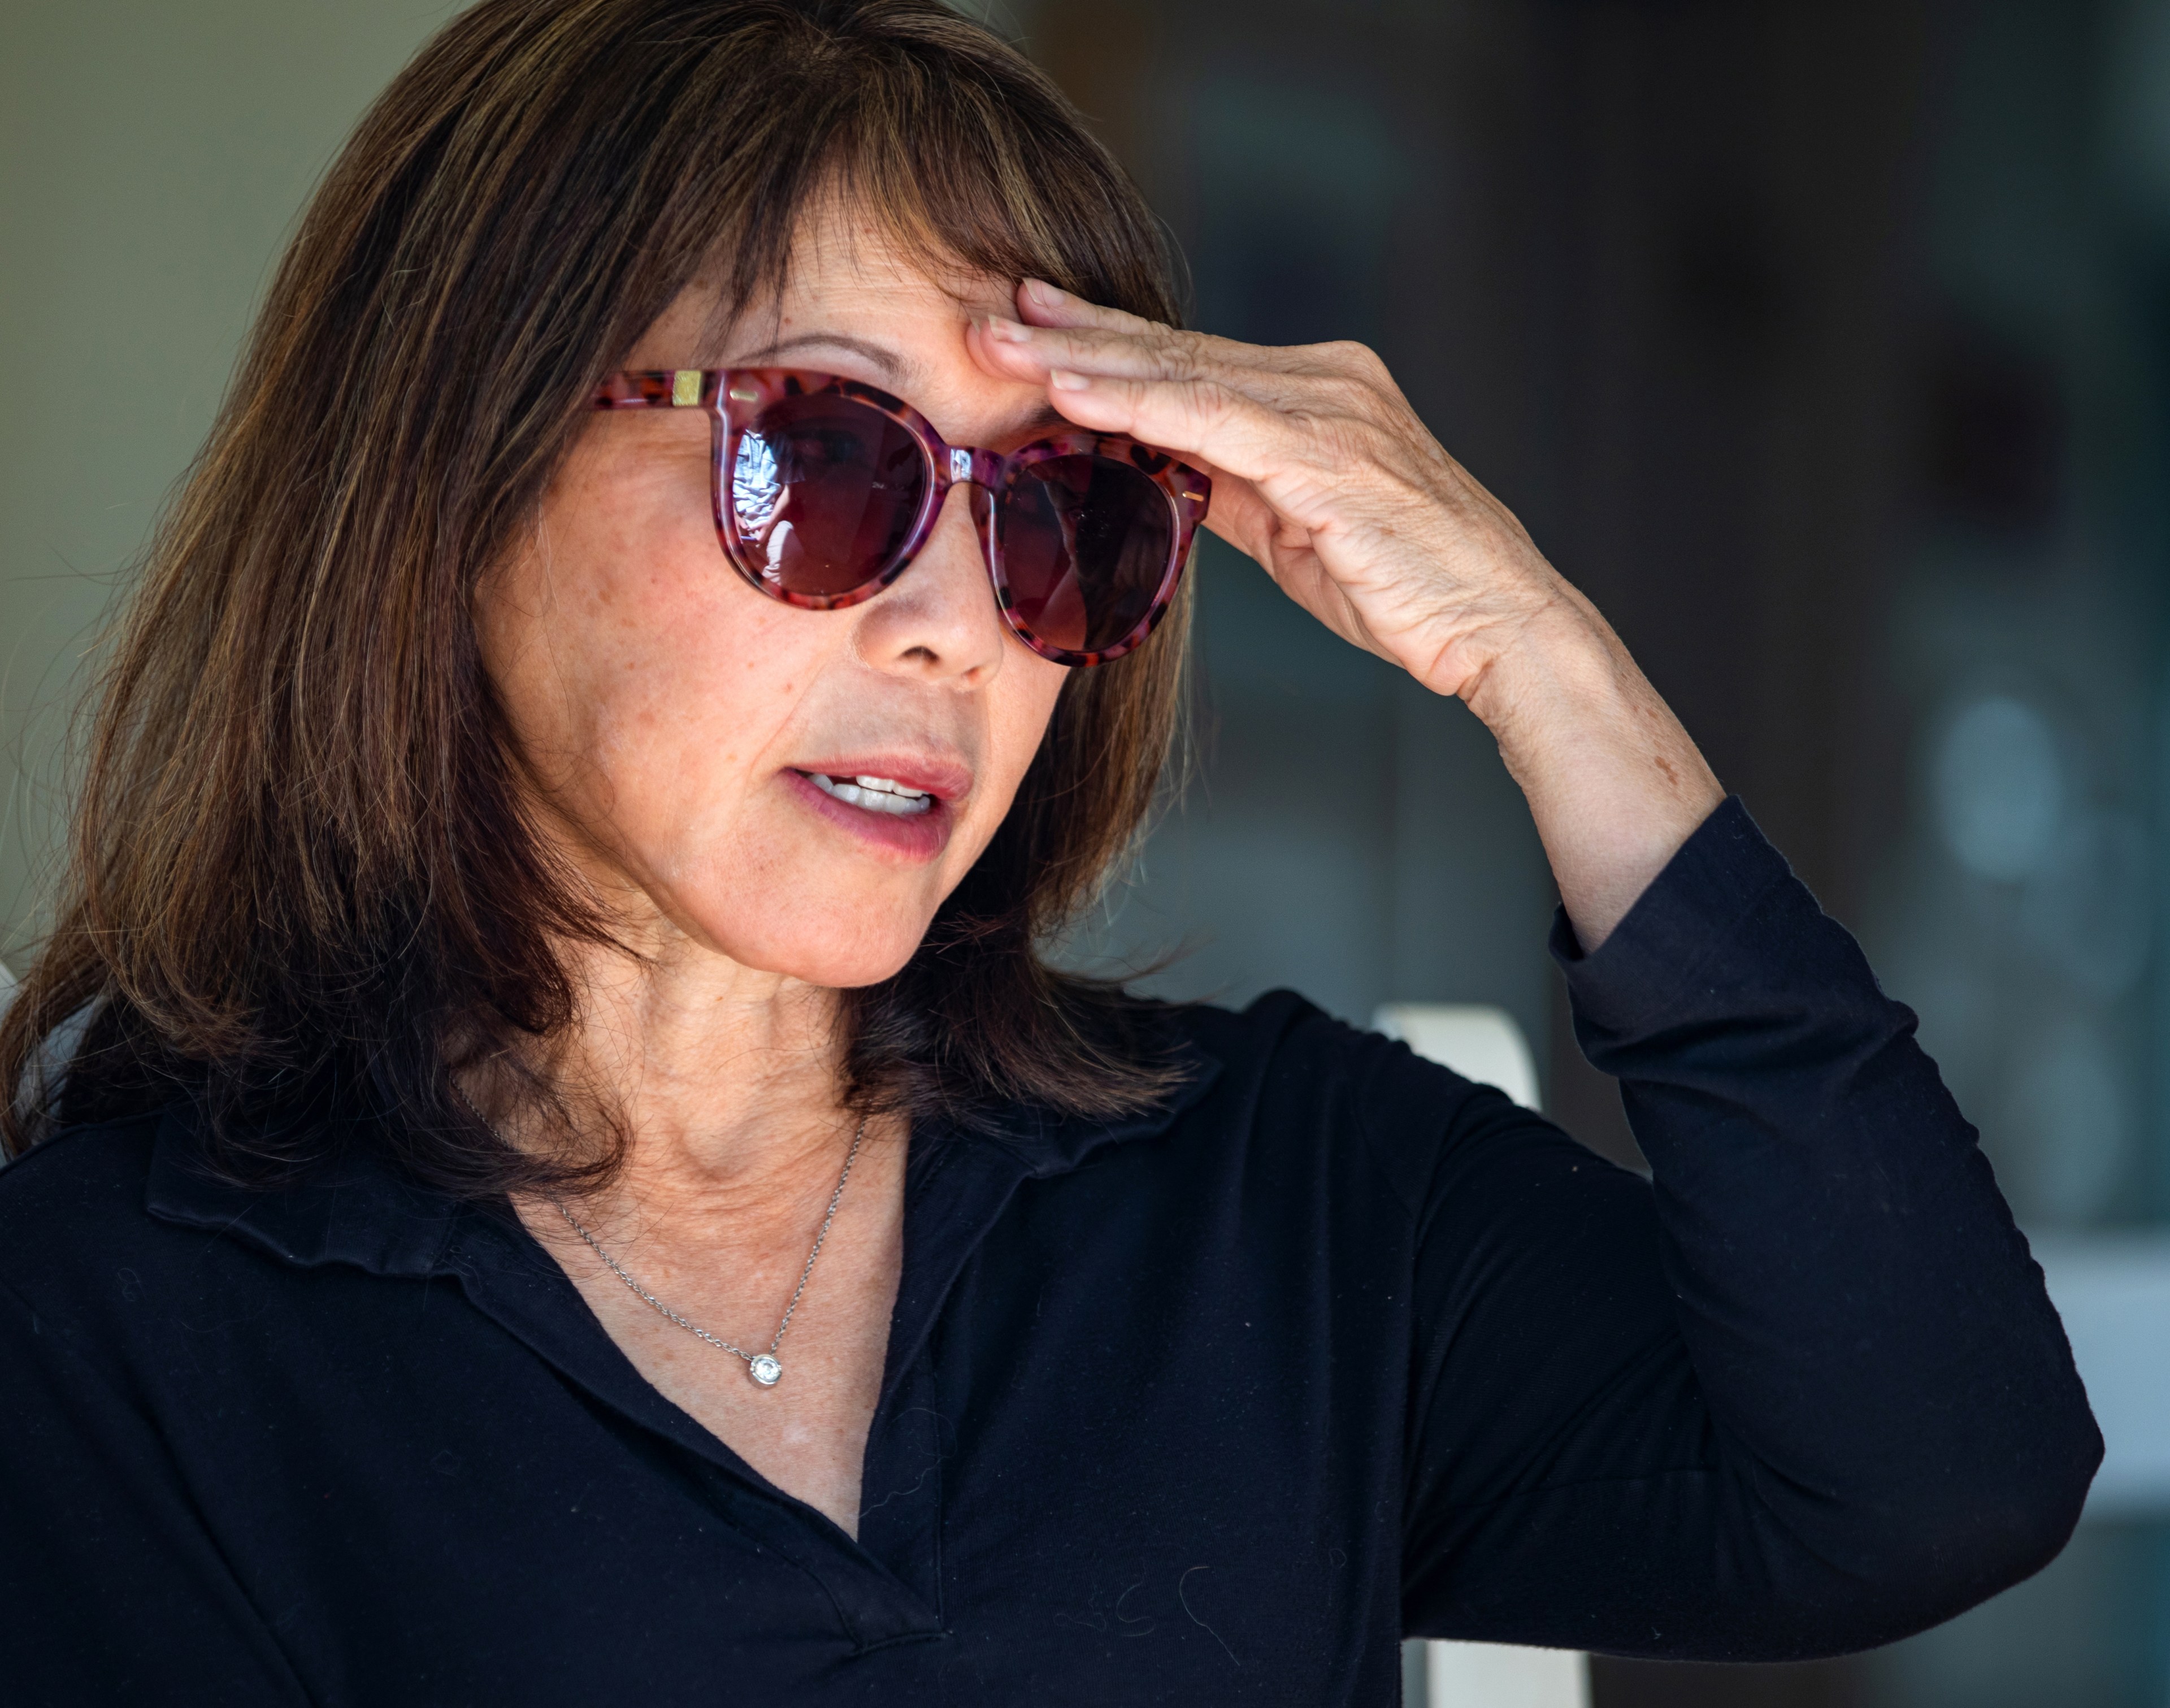 A woman in sunglasses with her hand on her forehead, wearing a black shirt and a necklace.